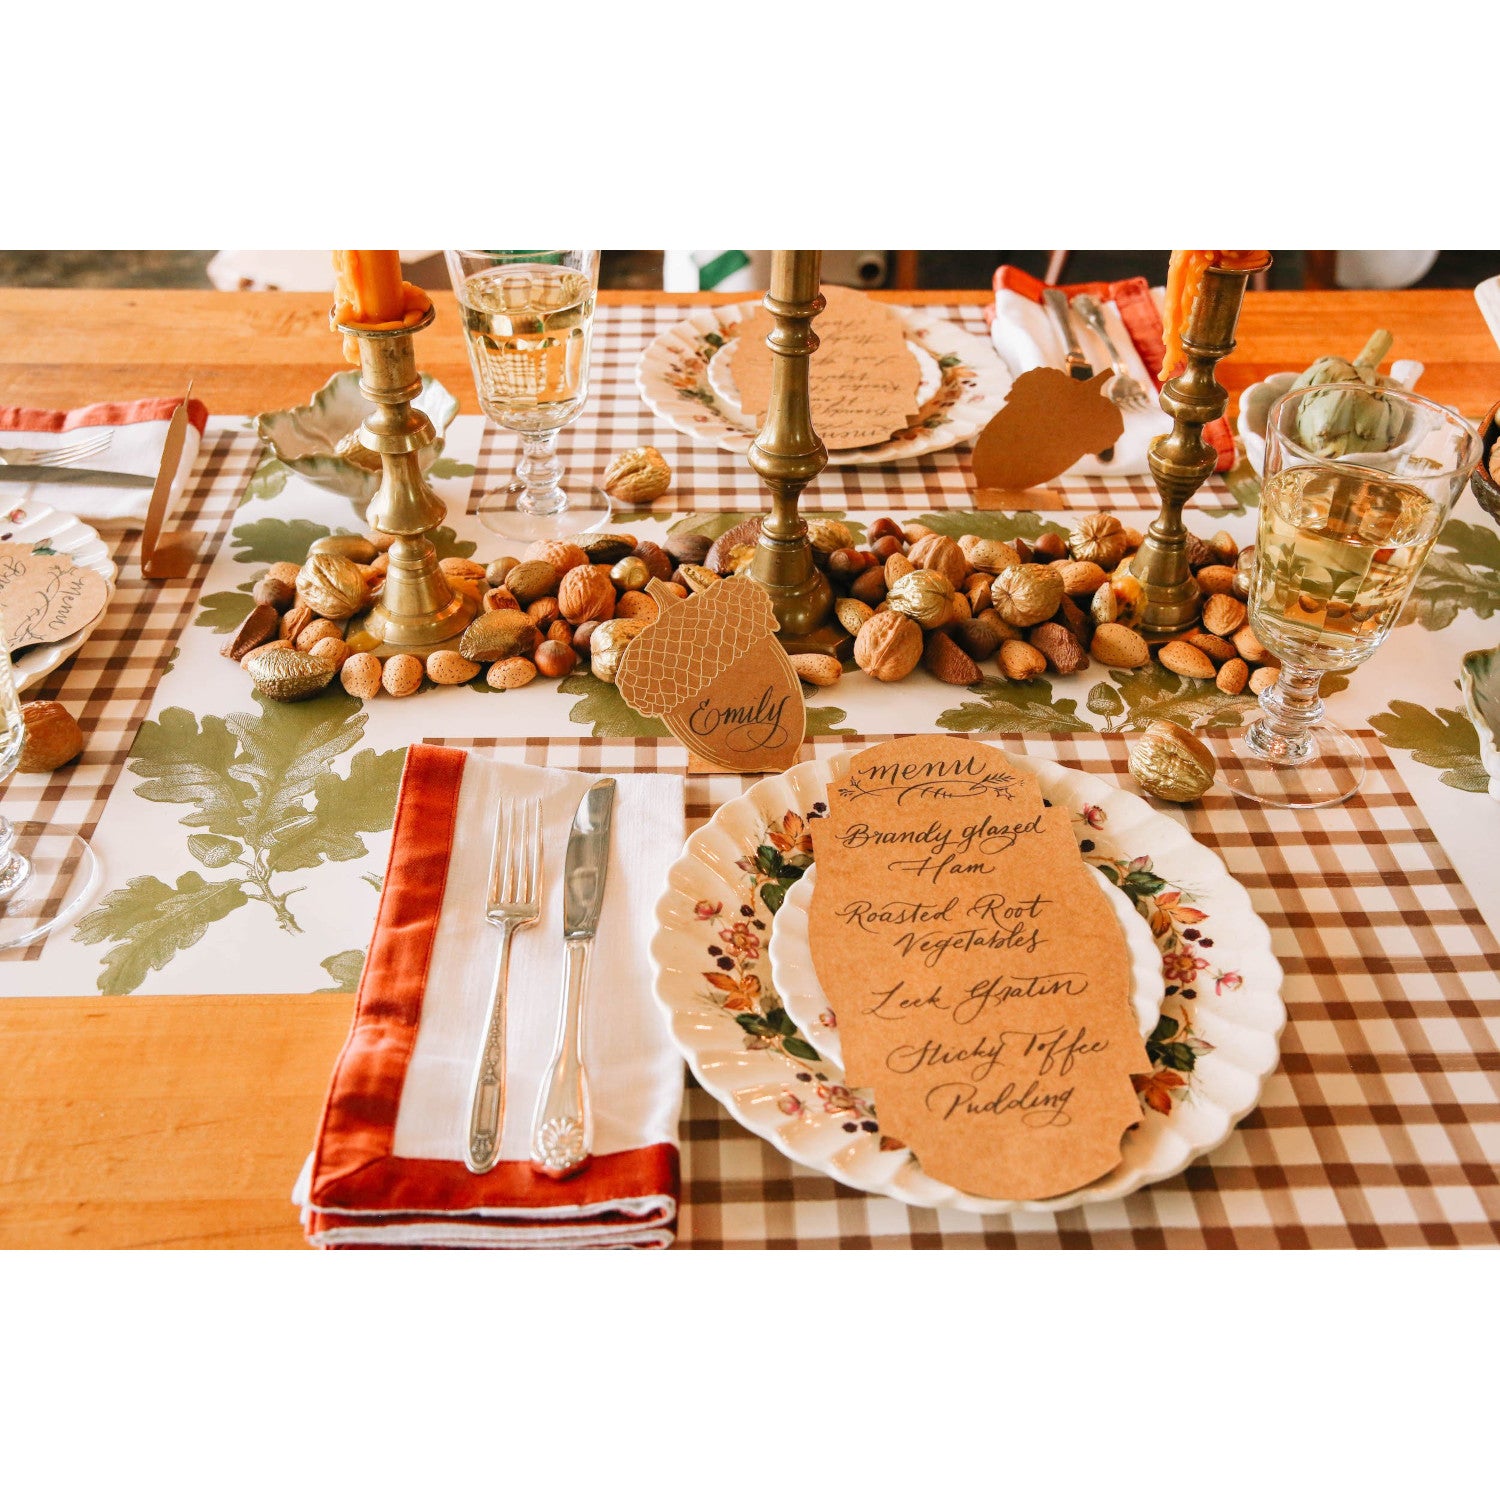 An elegant fall-themed table setting with Acorn Place Cards behind each plate.